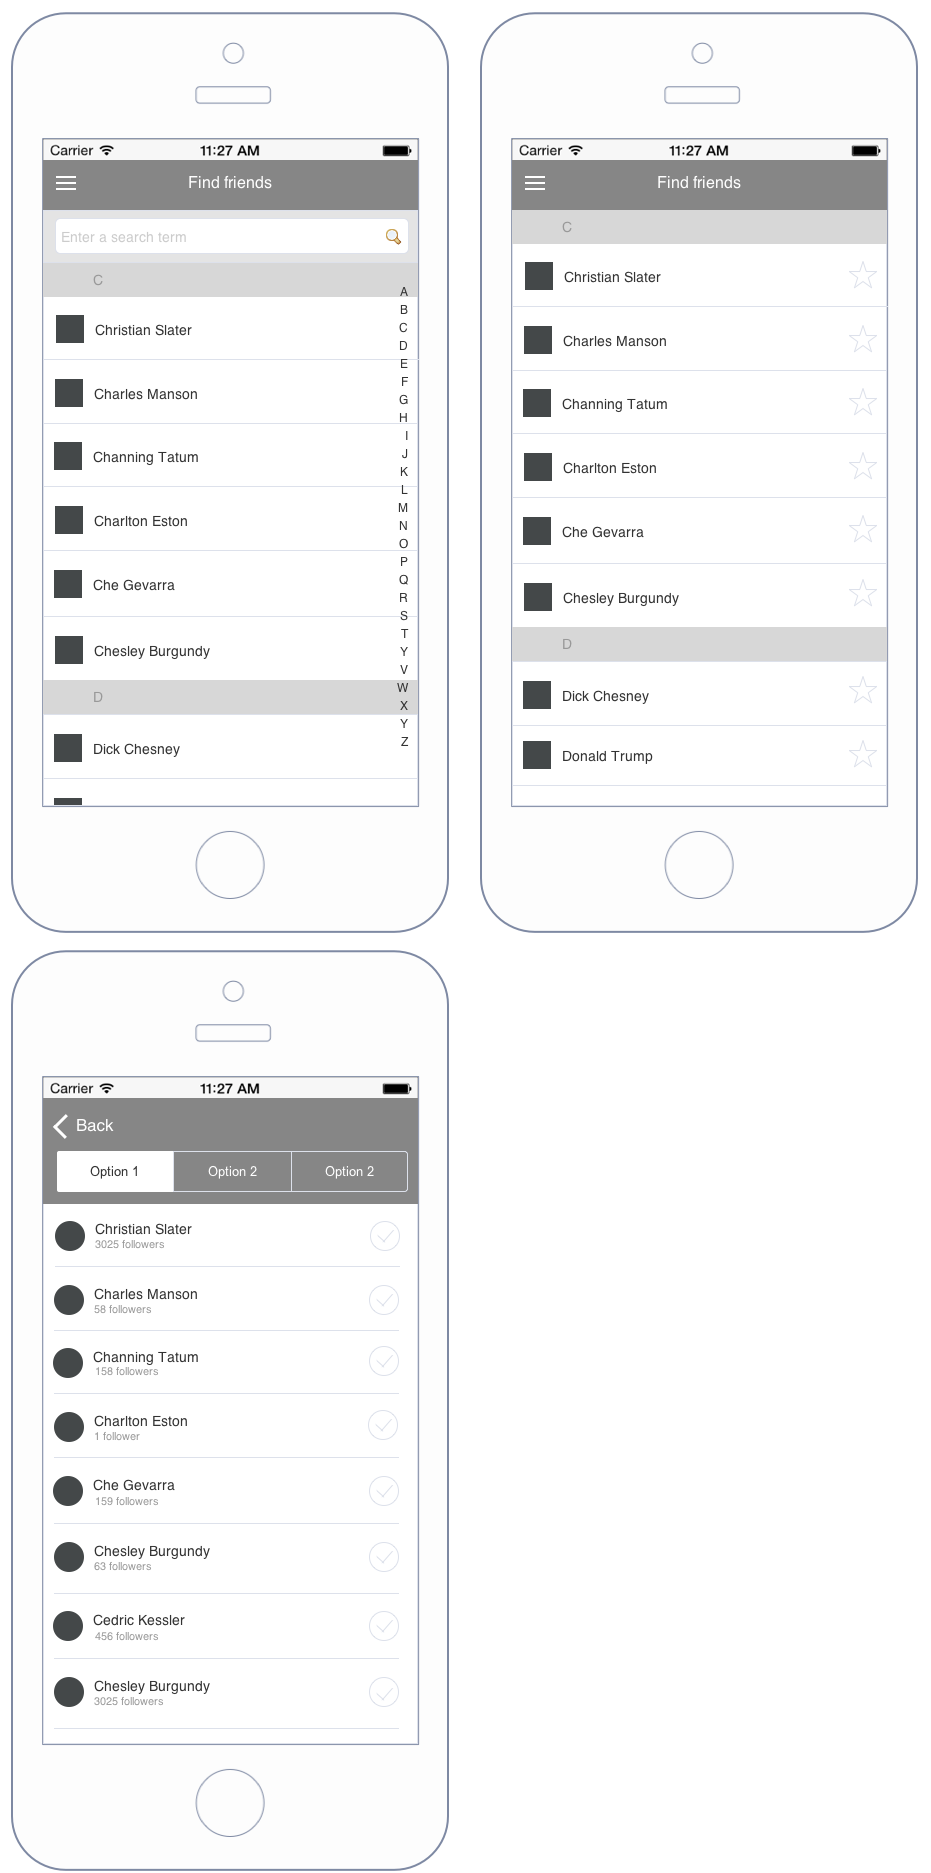 Totalwireframe 原型素材系列之 iPhone Apps Library [for Axure]插图8